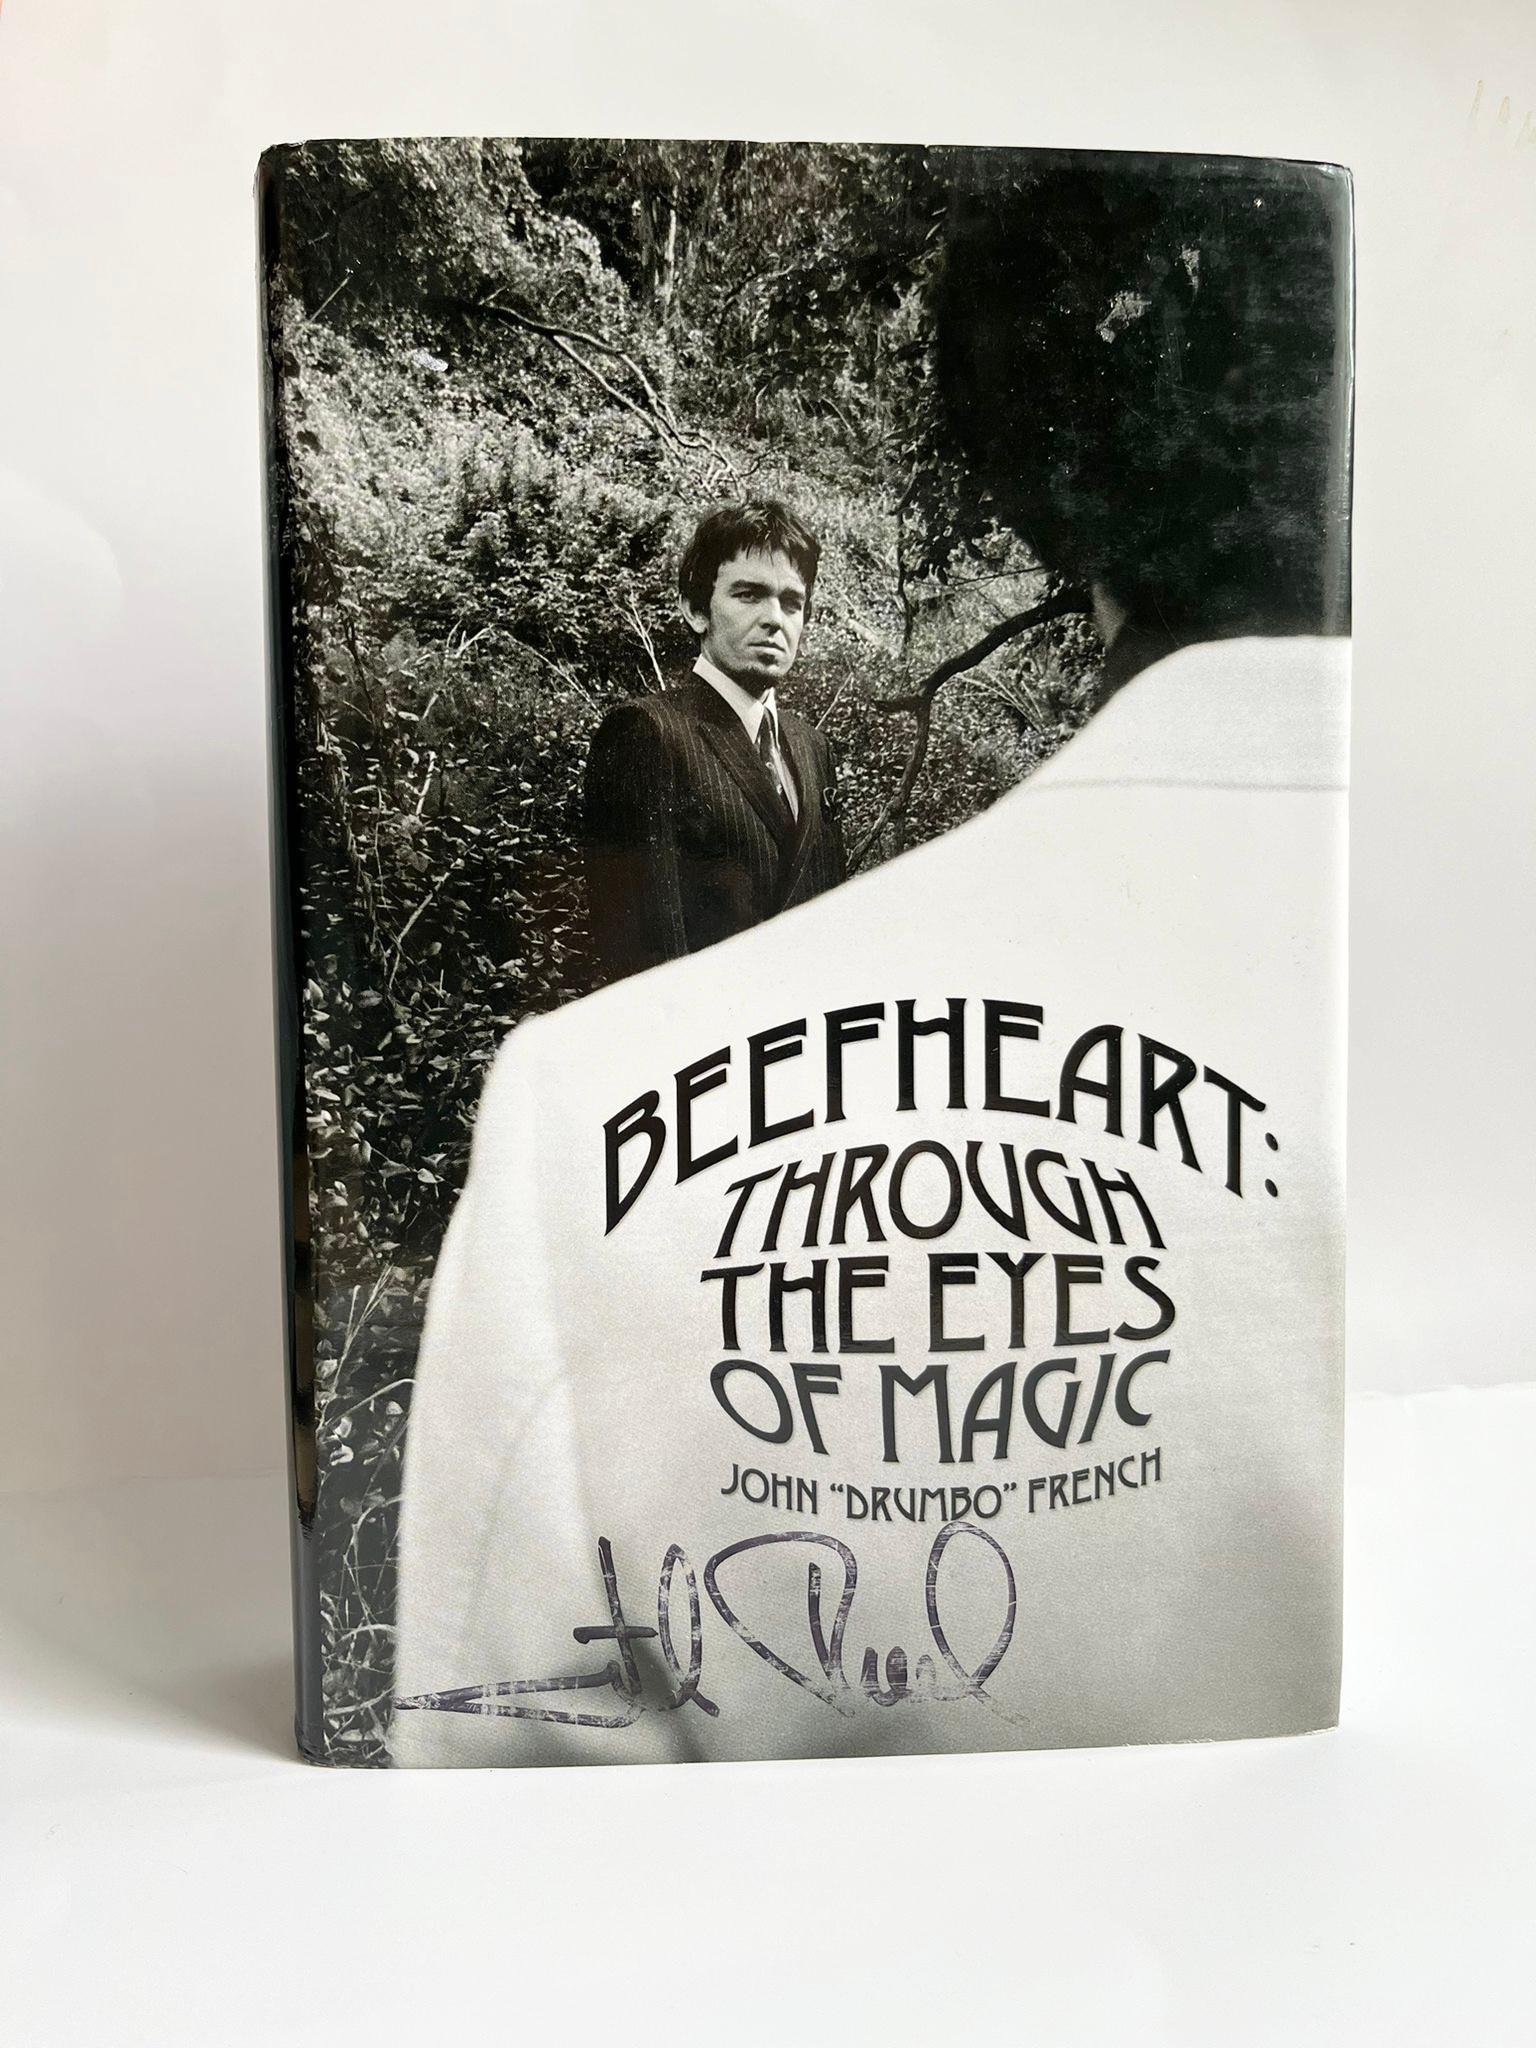 BEEFHEART: THROUGH THE EYES OF MAGIC  by John 'Drumbo' French, Signed.